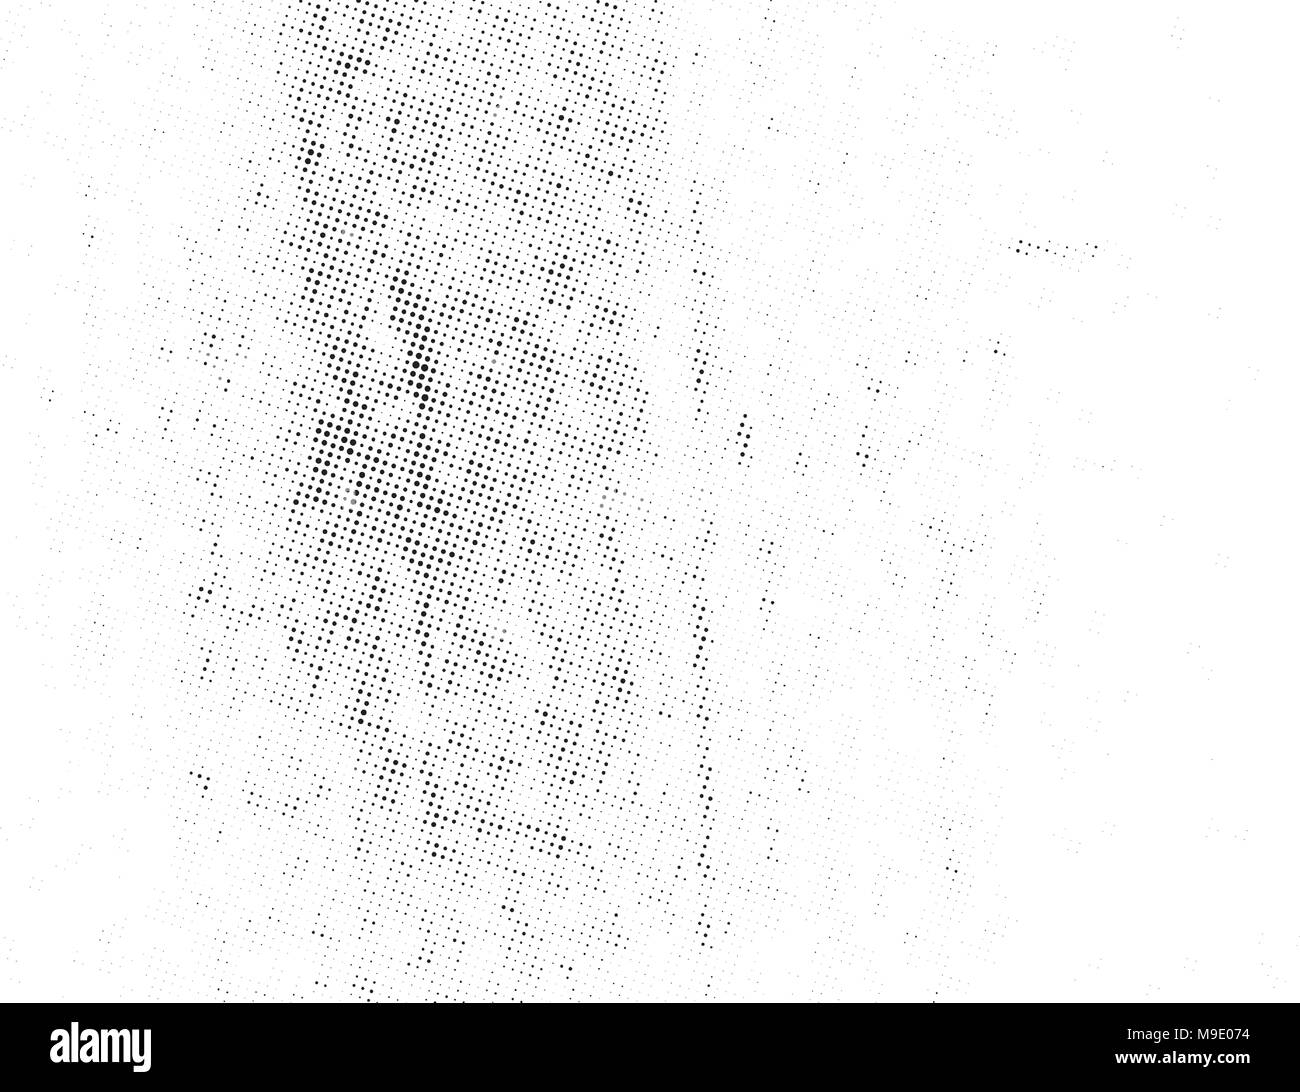 Distressed grunge grainy overlay texture. Scratch Old Texture Wall Background Stock Vector